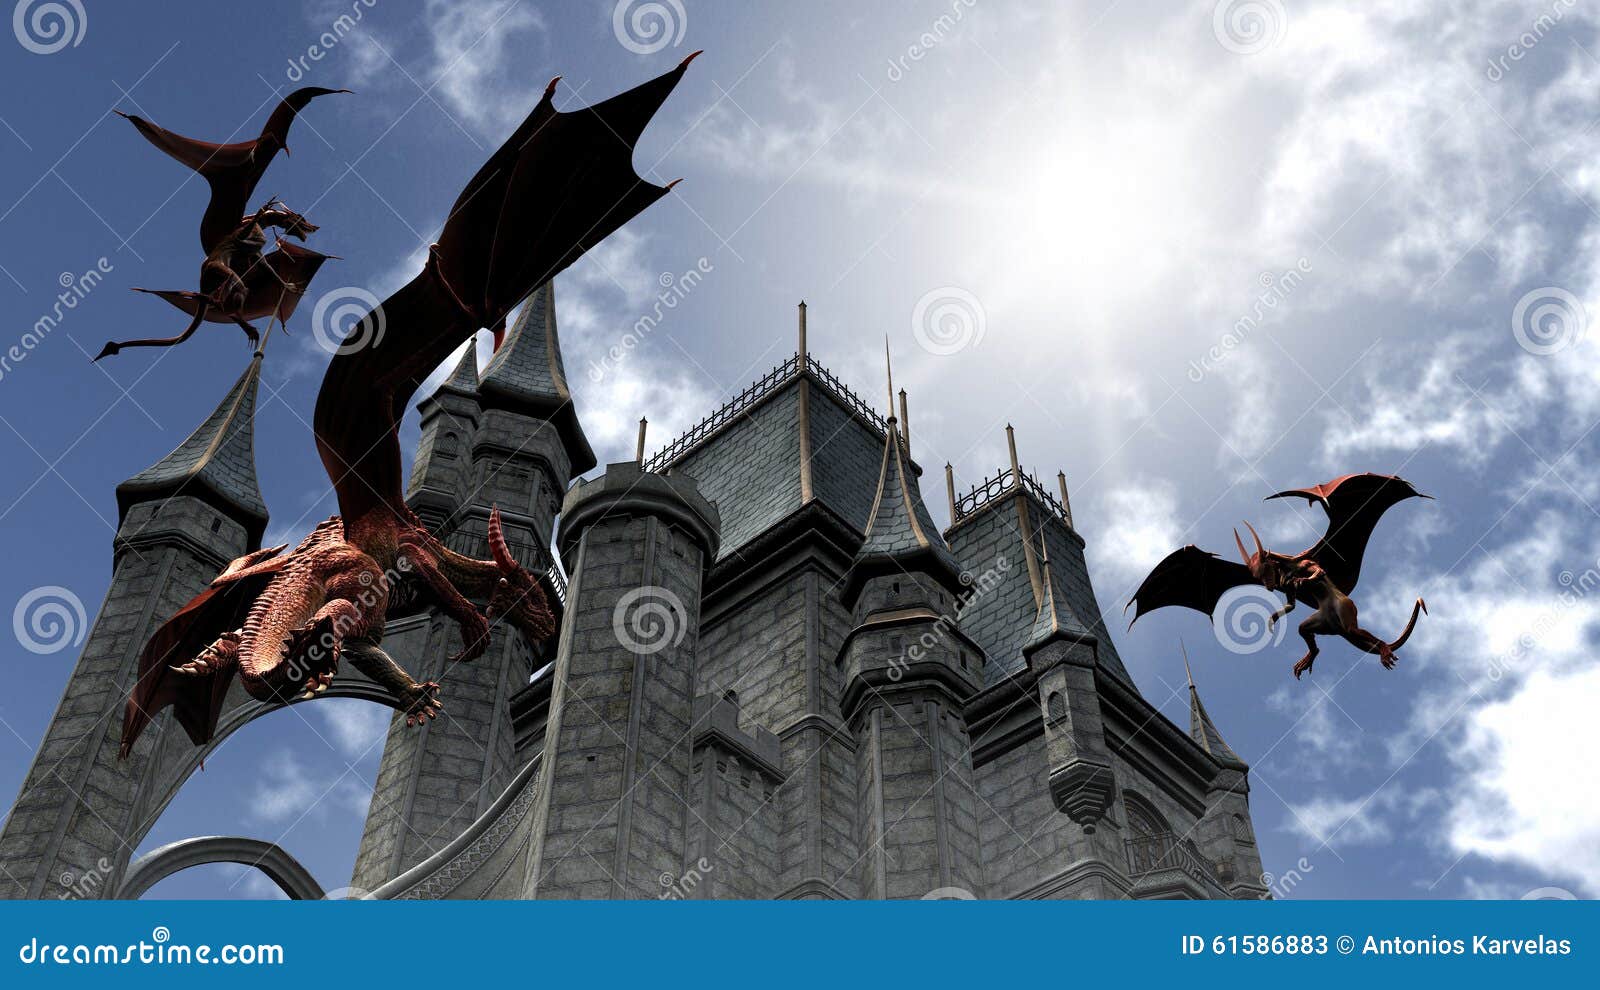 three red dragons attacking the castle